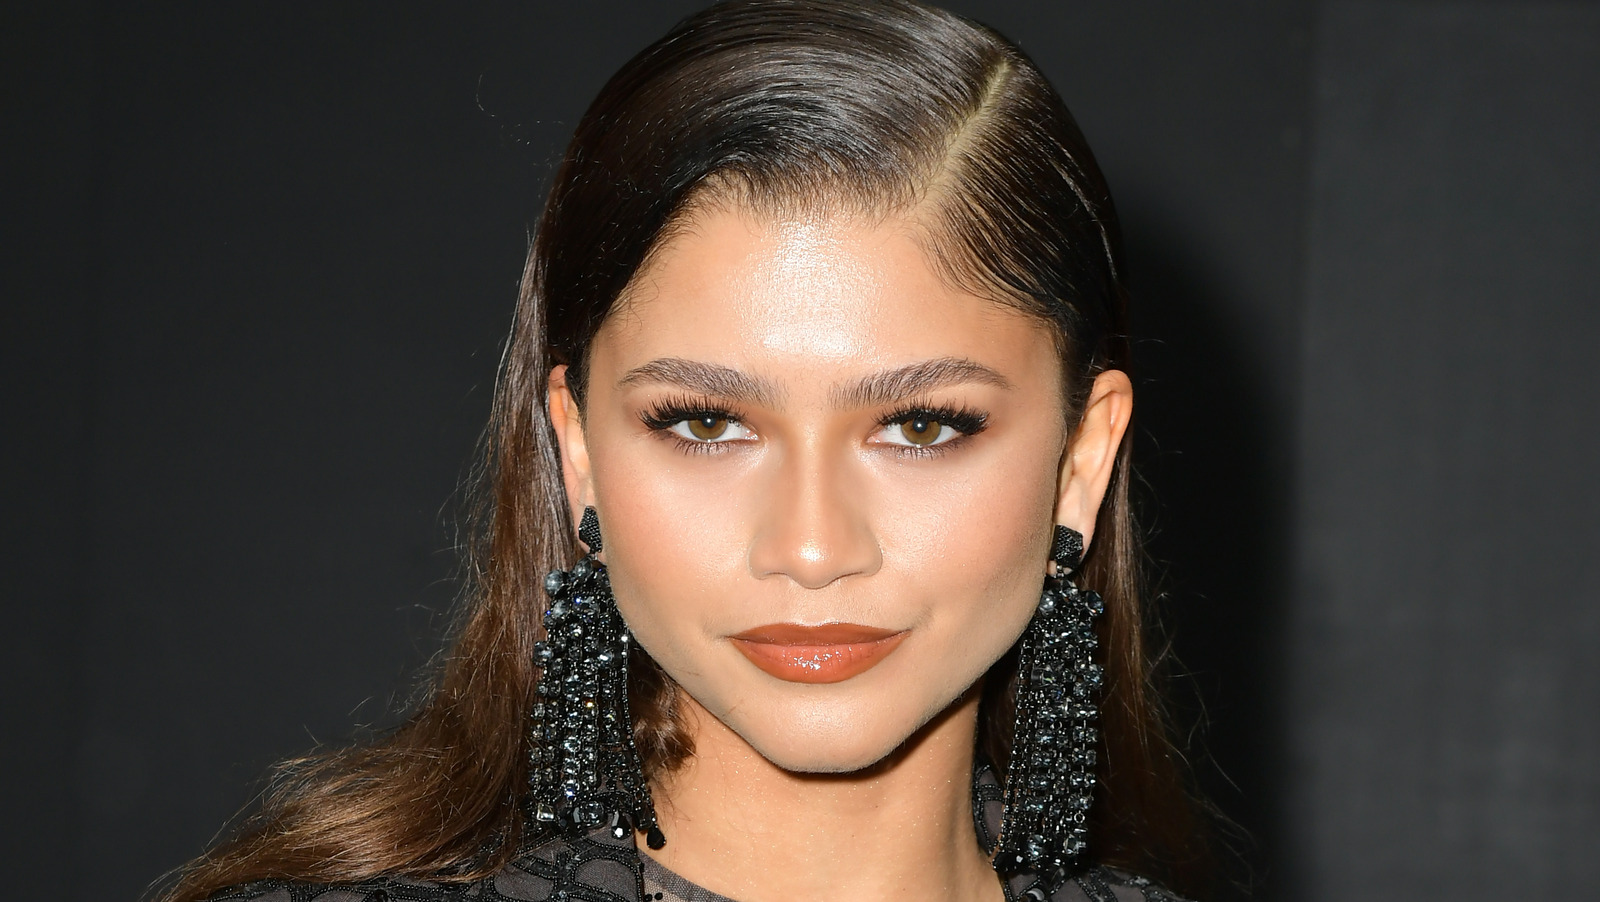 Does Zendaya Have A Close Relationship With Her 5 Older Siblings?